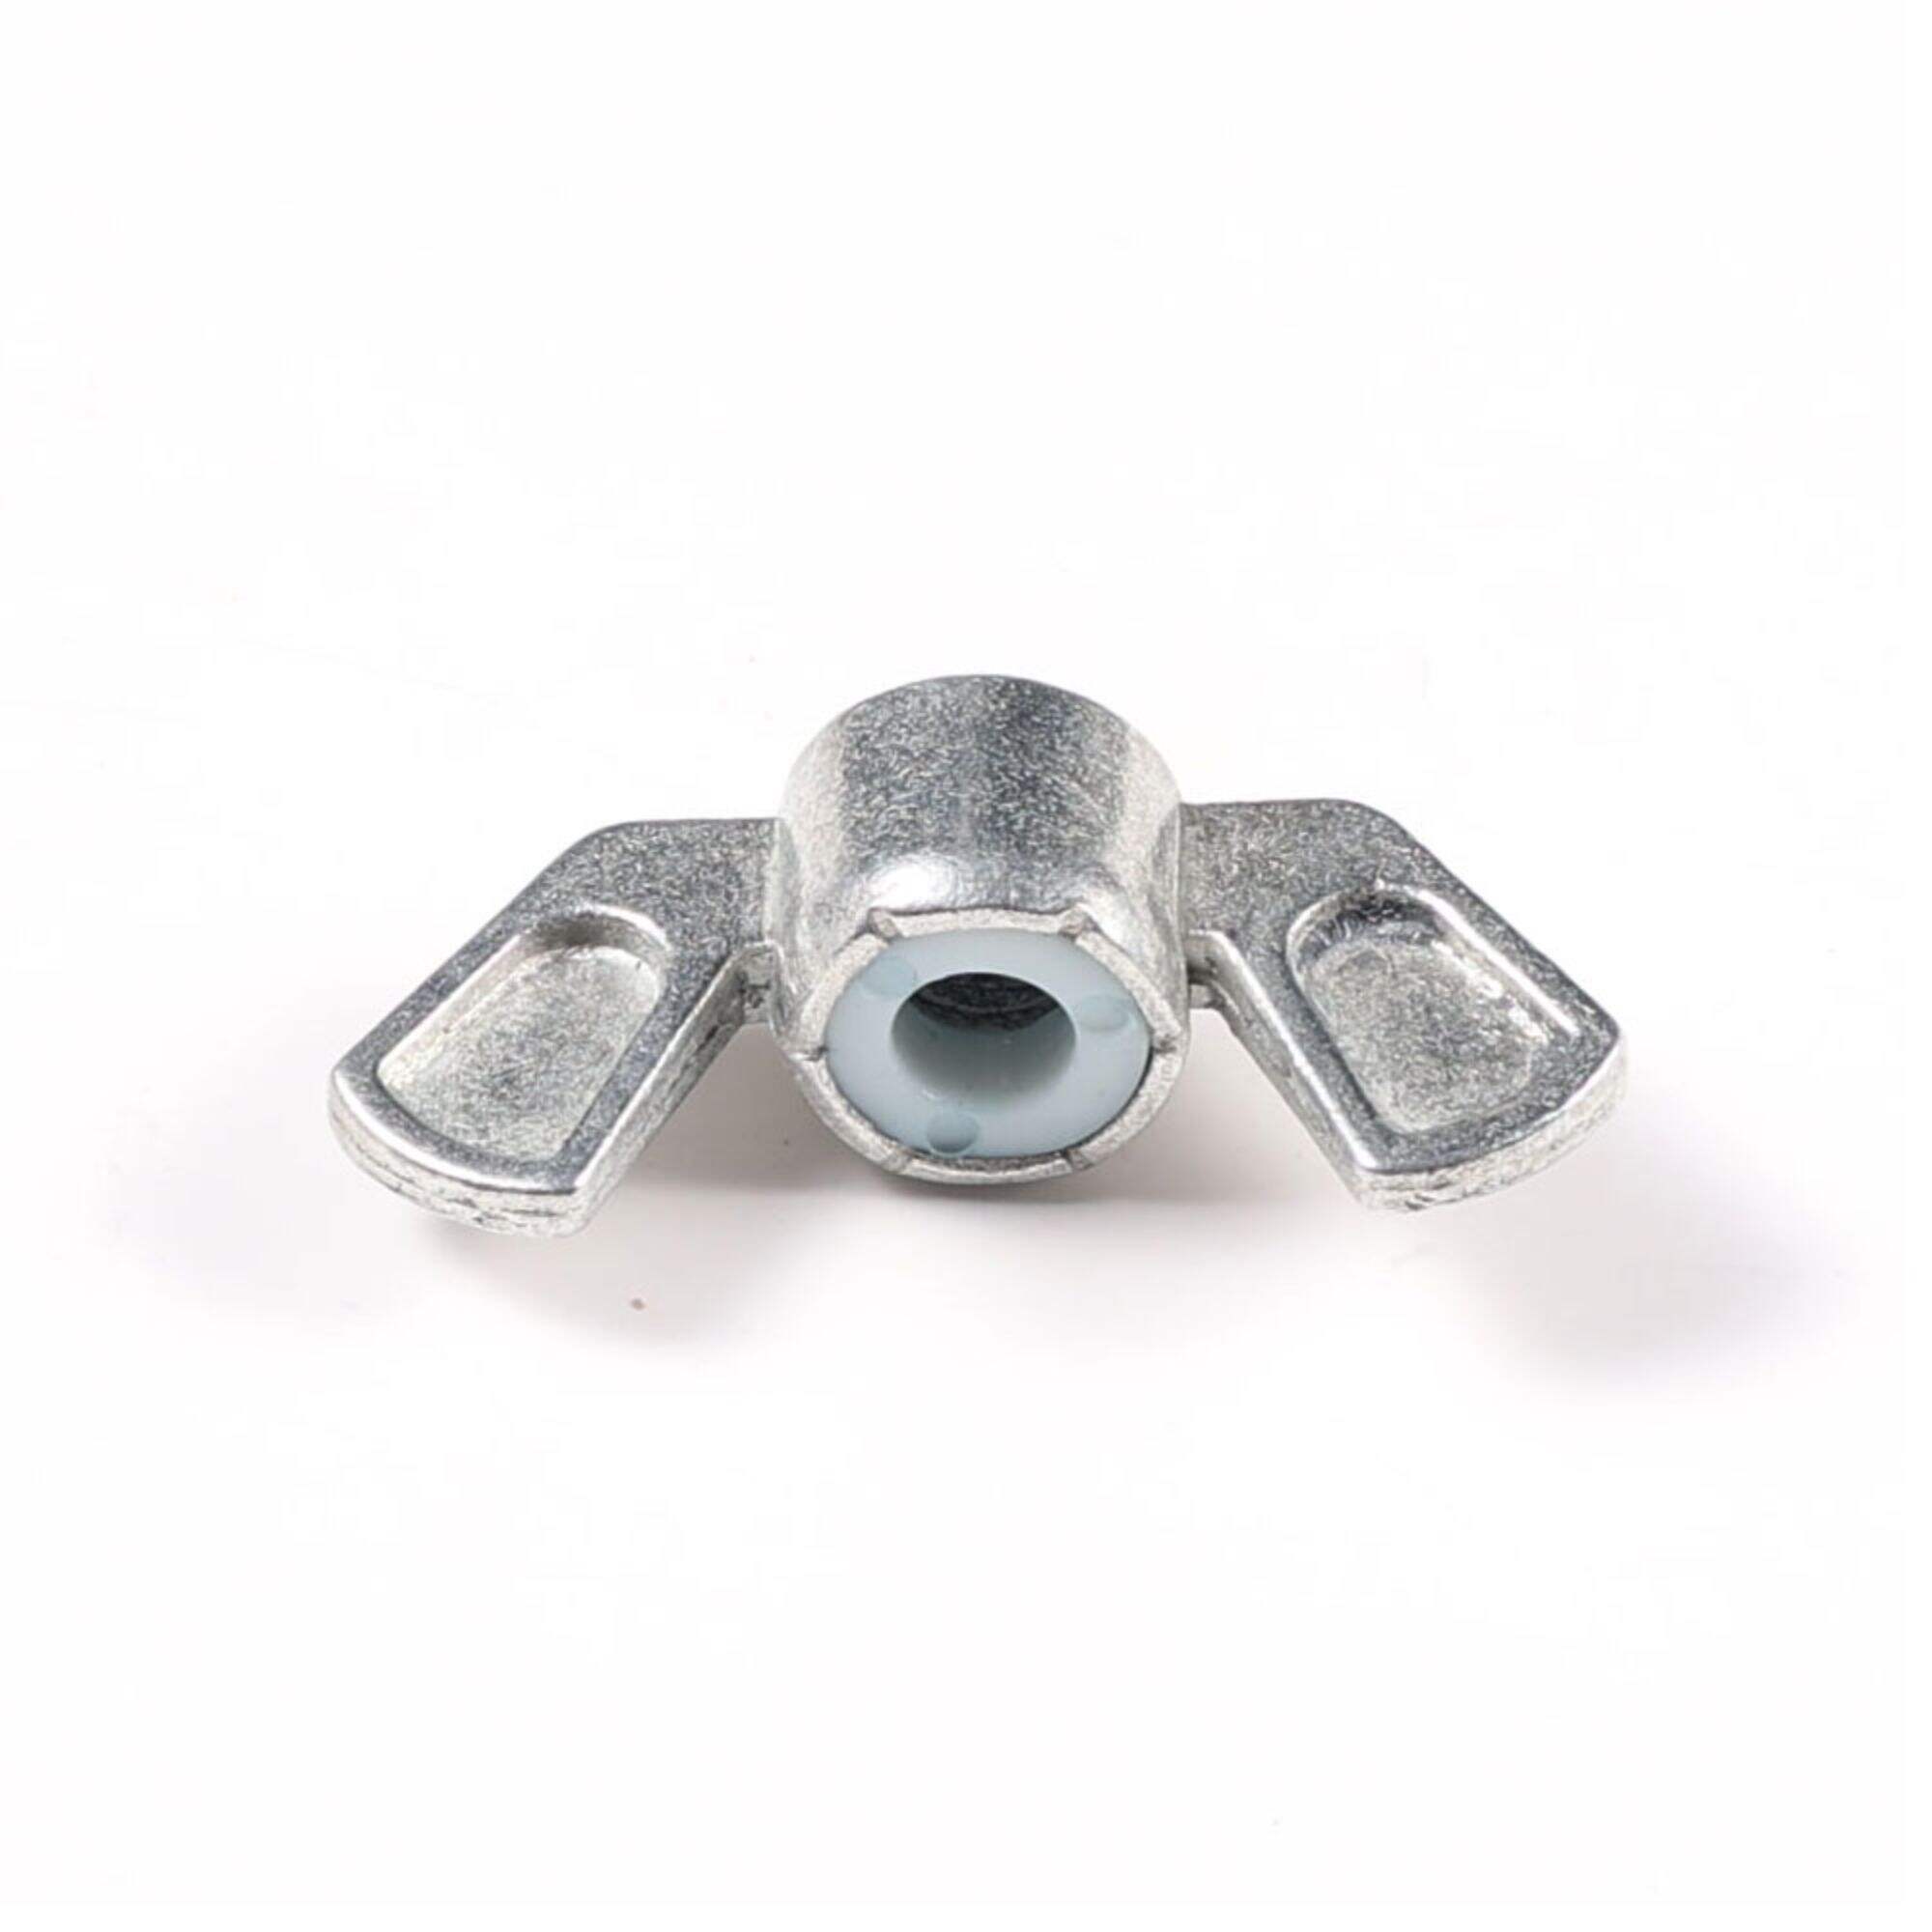 Stainless Steel Flanged Wing Nuts Washer Base Bolt And Butterfly Nuts Zinc Alloy